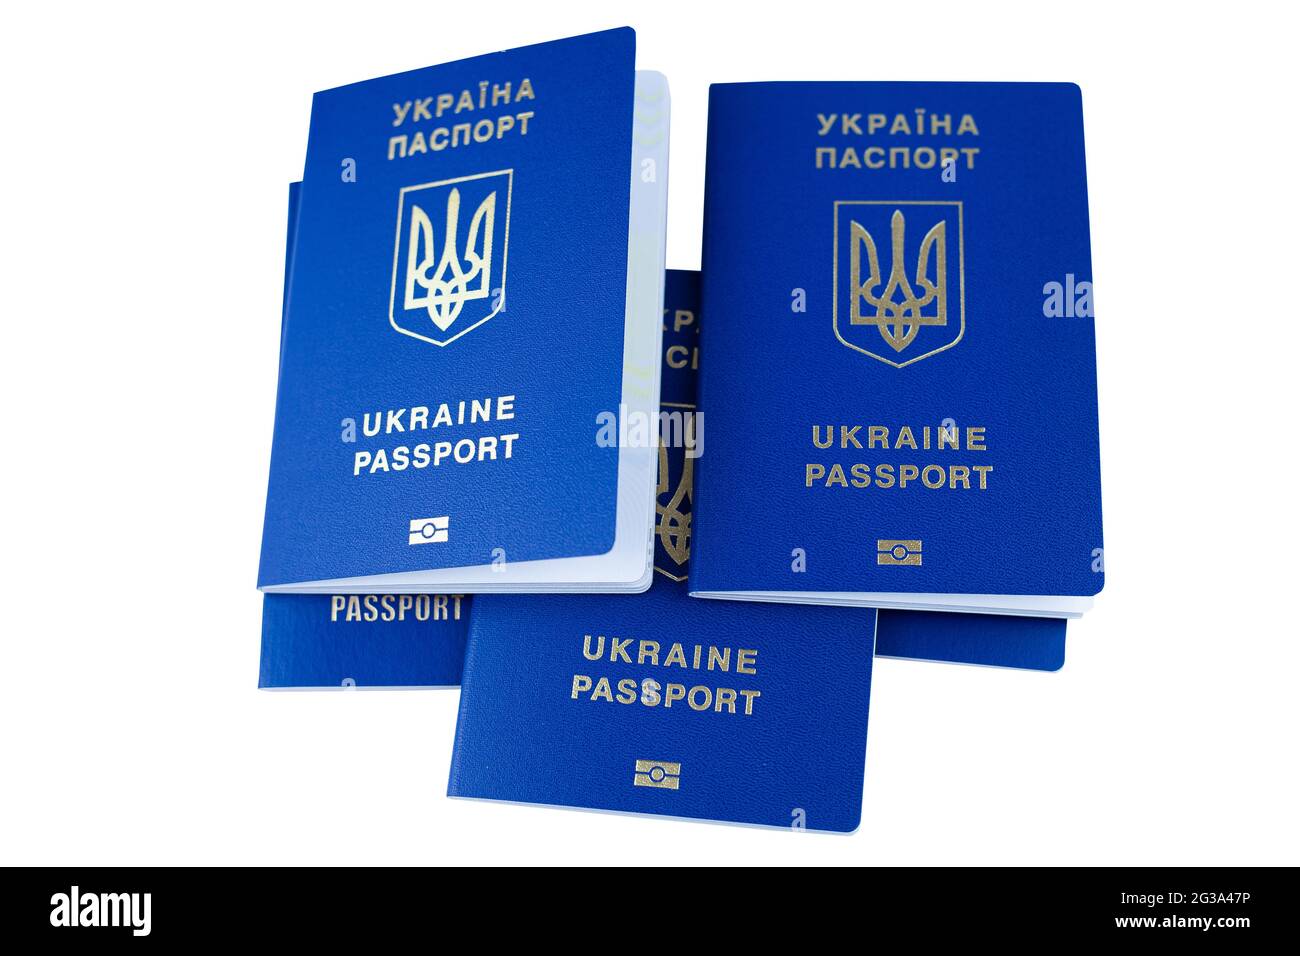 Trip ukraine Cut Out Stock Images & Pictures - Alamy